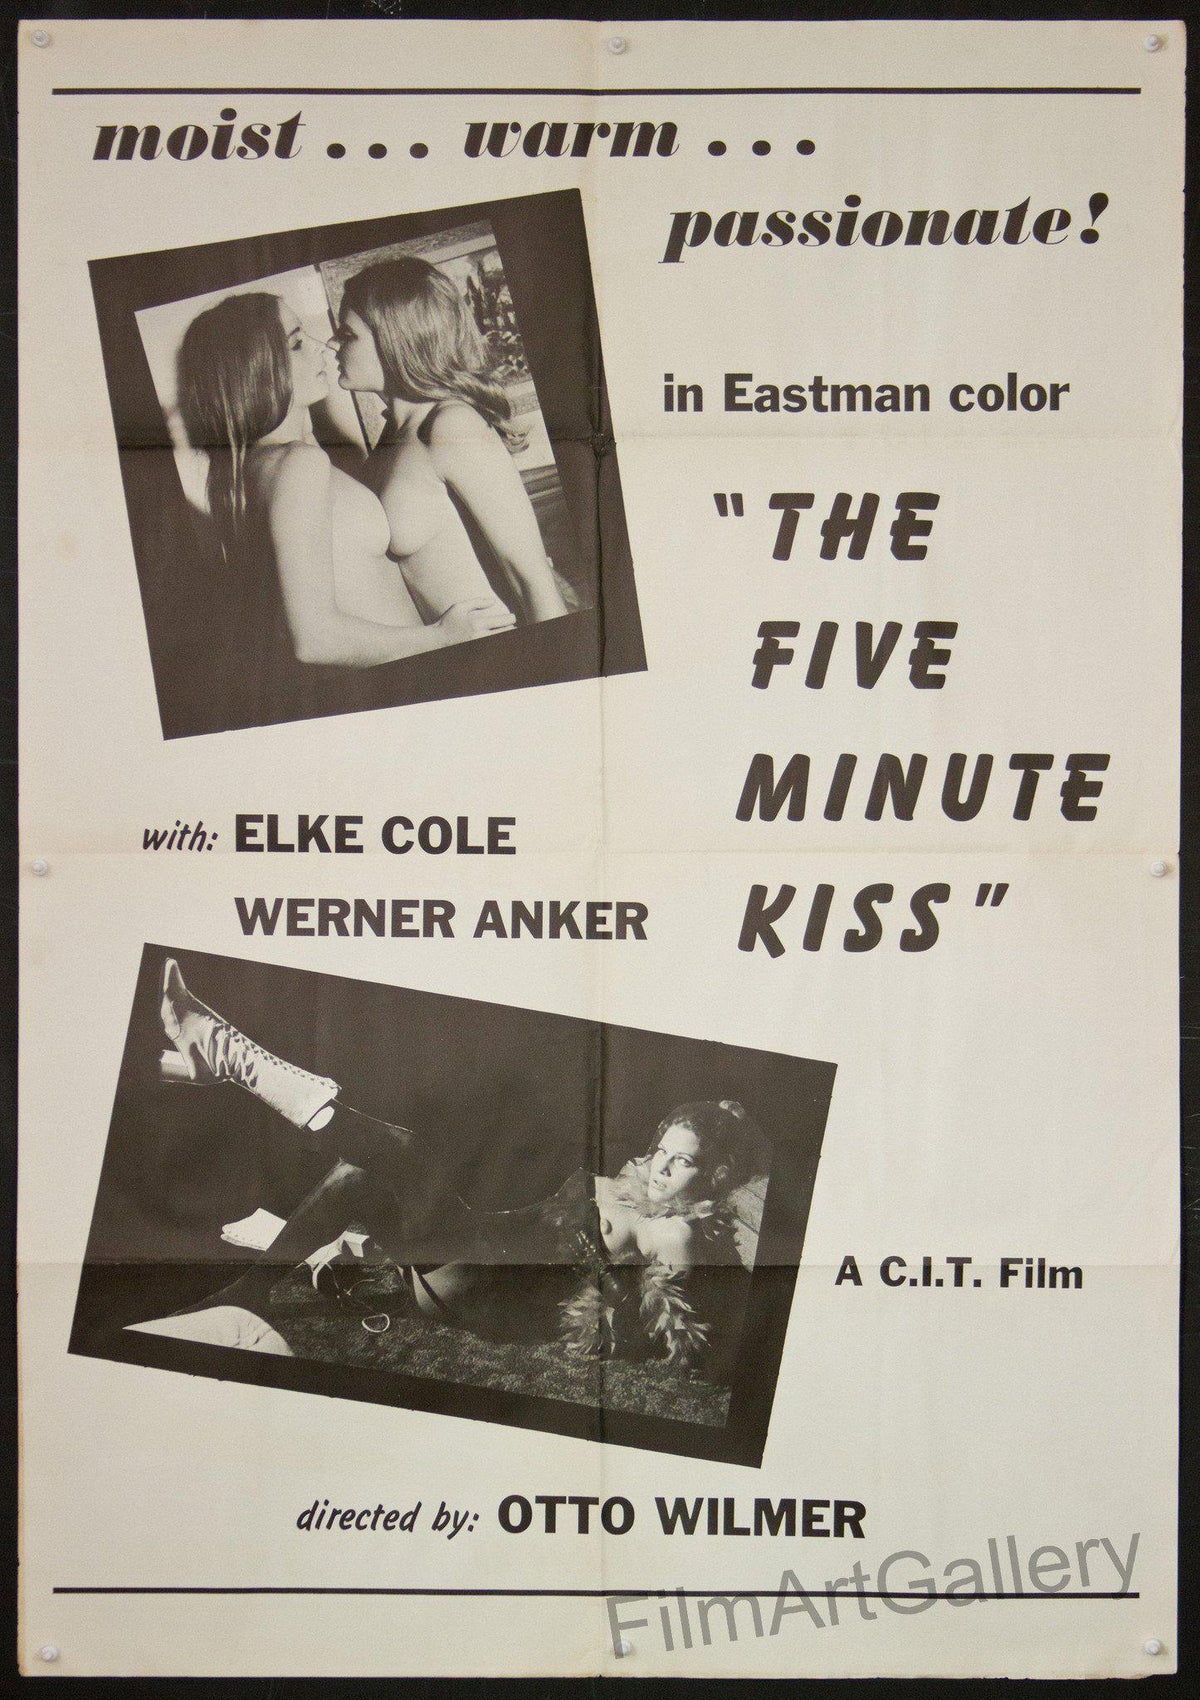 The Five Minute Kiss ( The 5 Minute Kiss ) 1 Sheet (27x41) Original Vintage Movie Poster